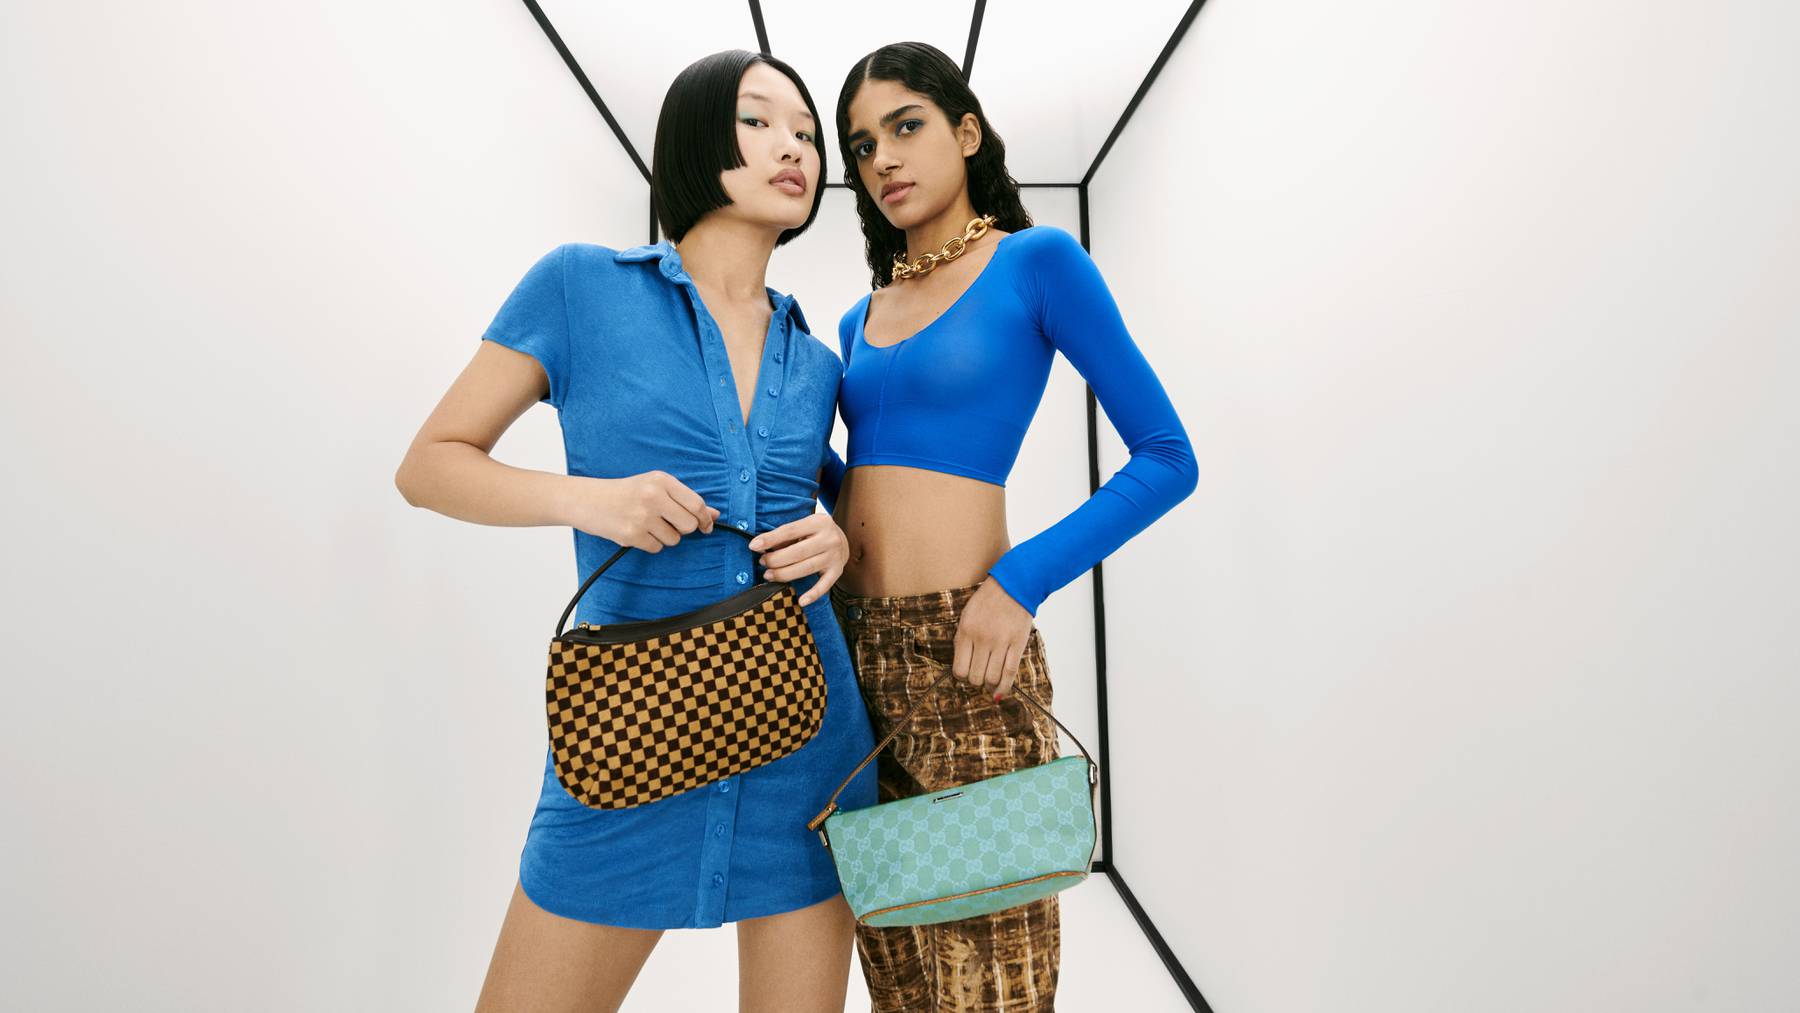 Two models wearing blue standing in a white room holding designer handbags.